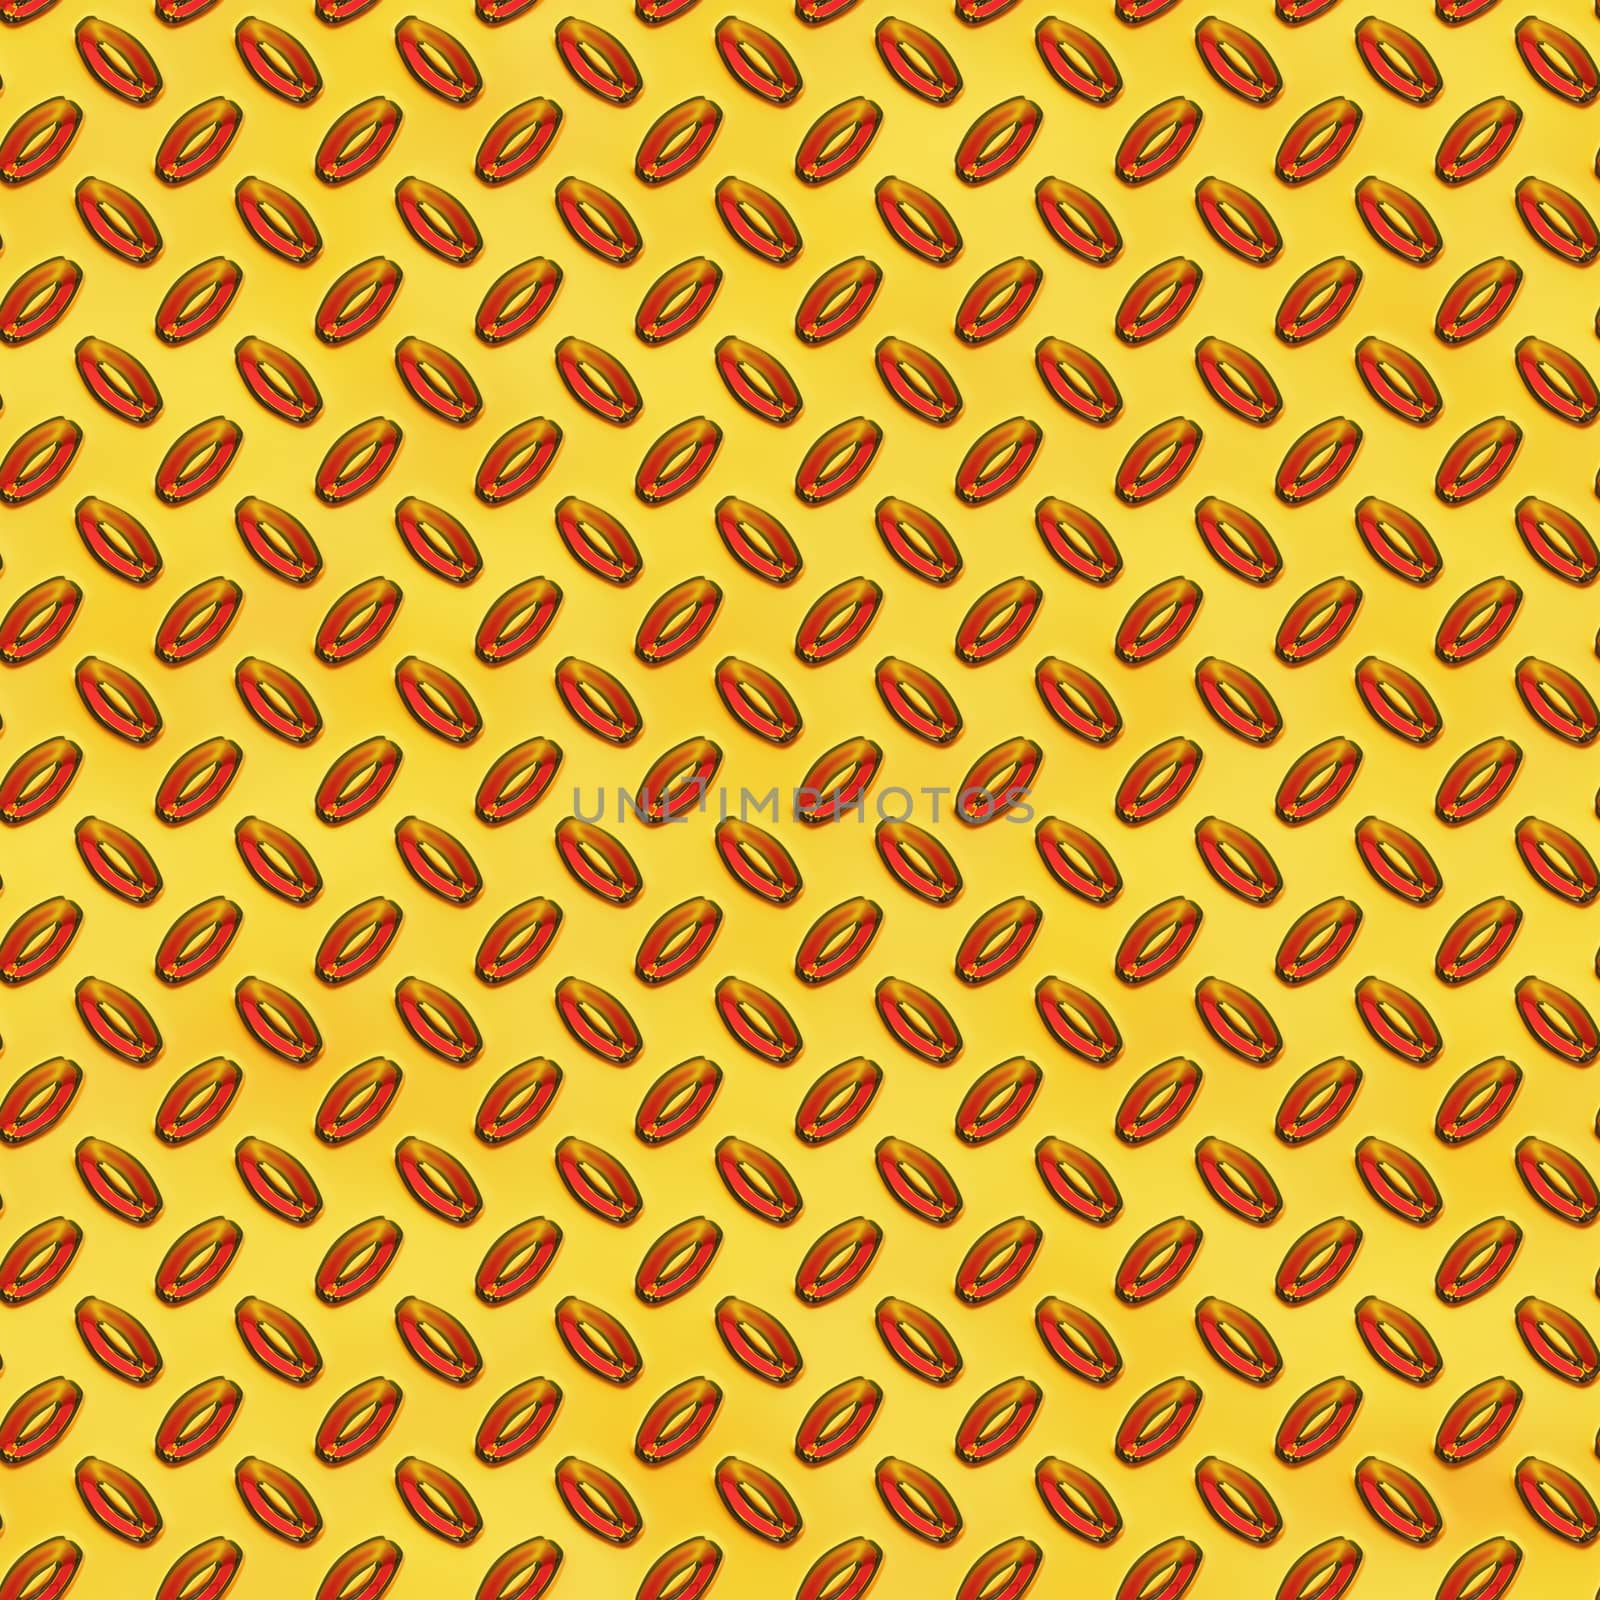 Yellow Red Metal Plate Seamless Texture by whitechild